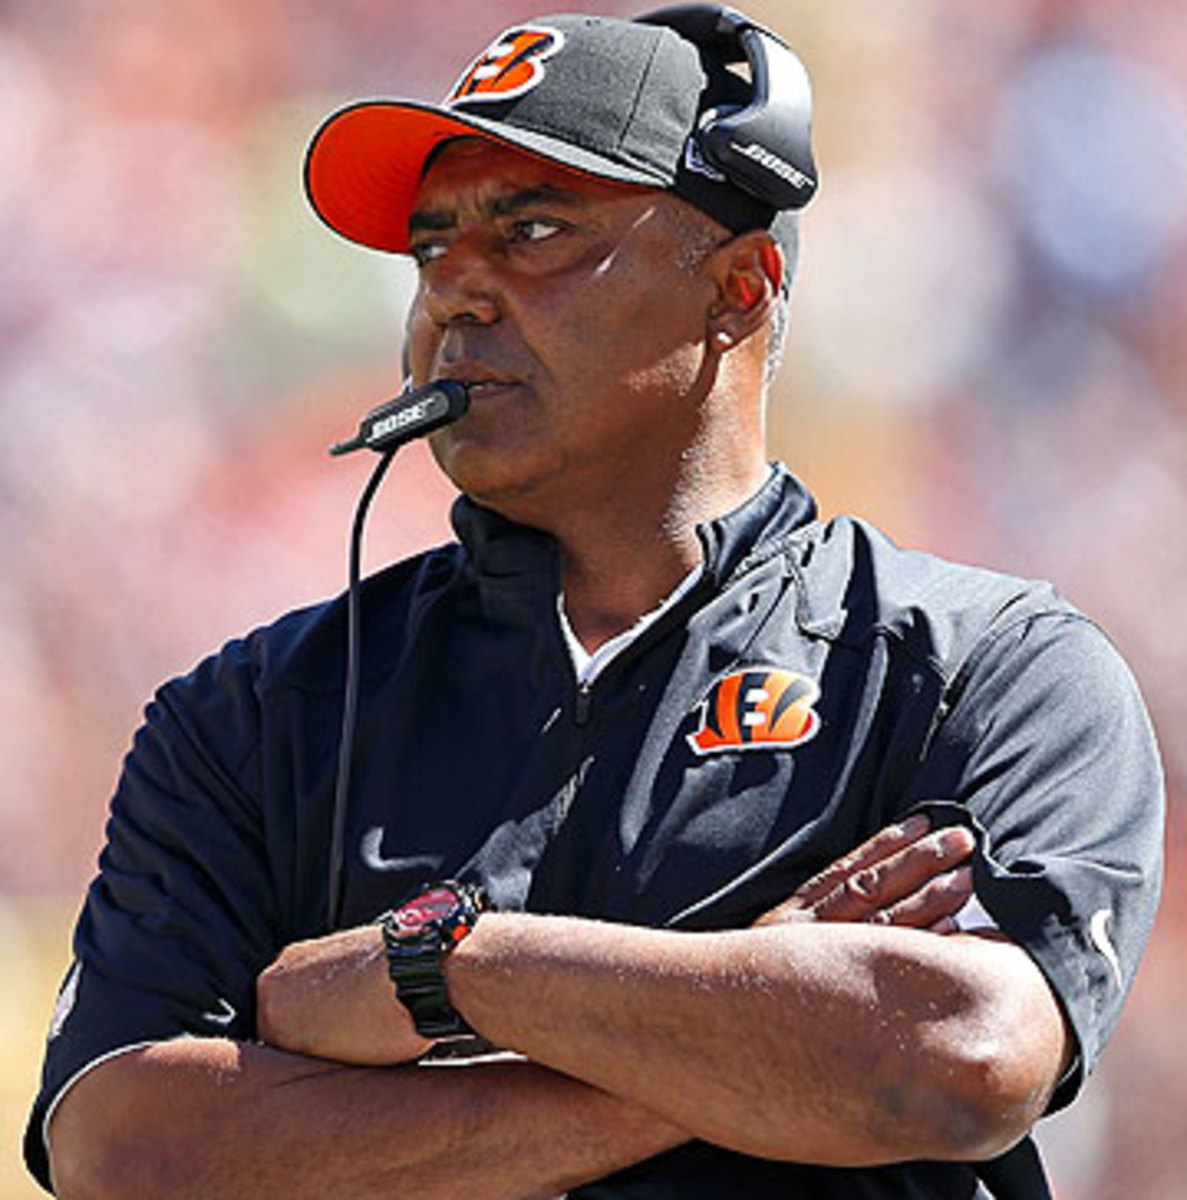 Bengals coach Marvin Lewis is 1-4 all-time against the Patriots, but the lone win came last season. (Joe Robbins/Getty Images)